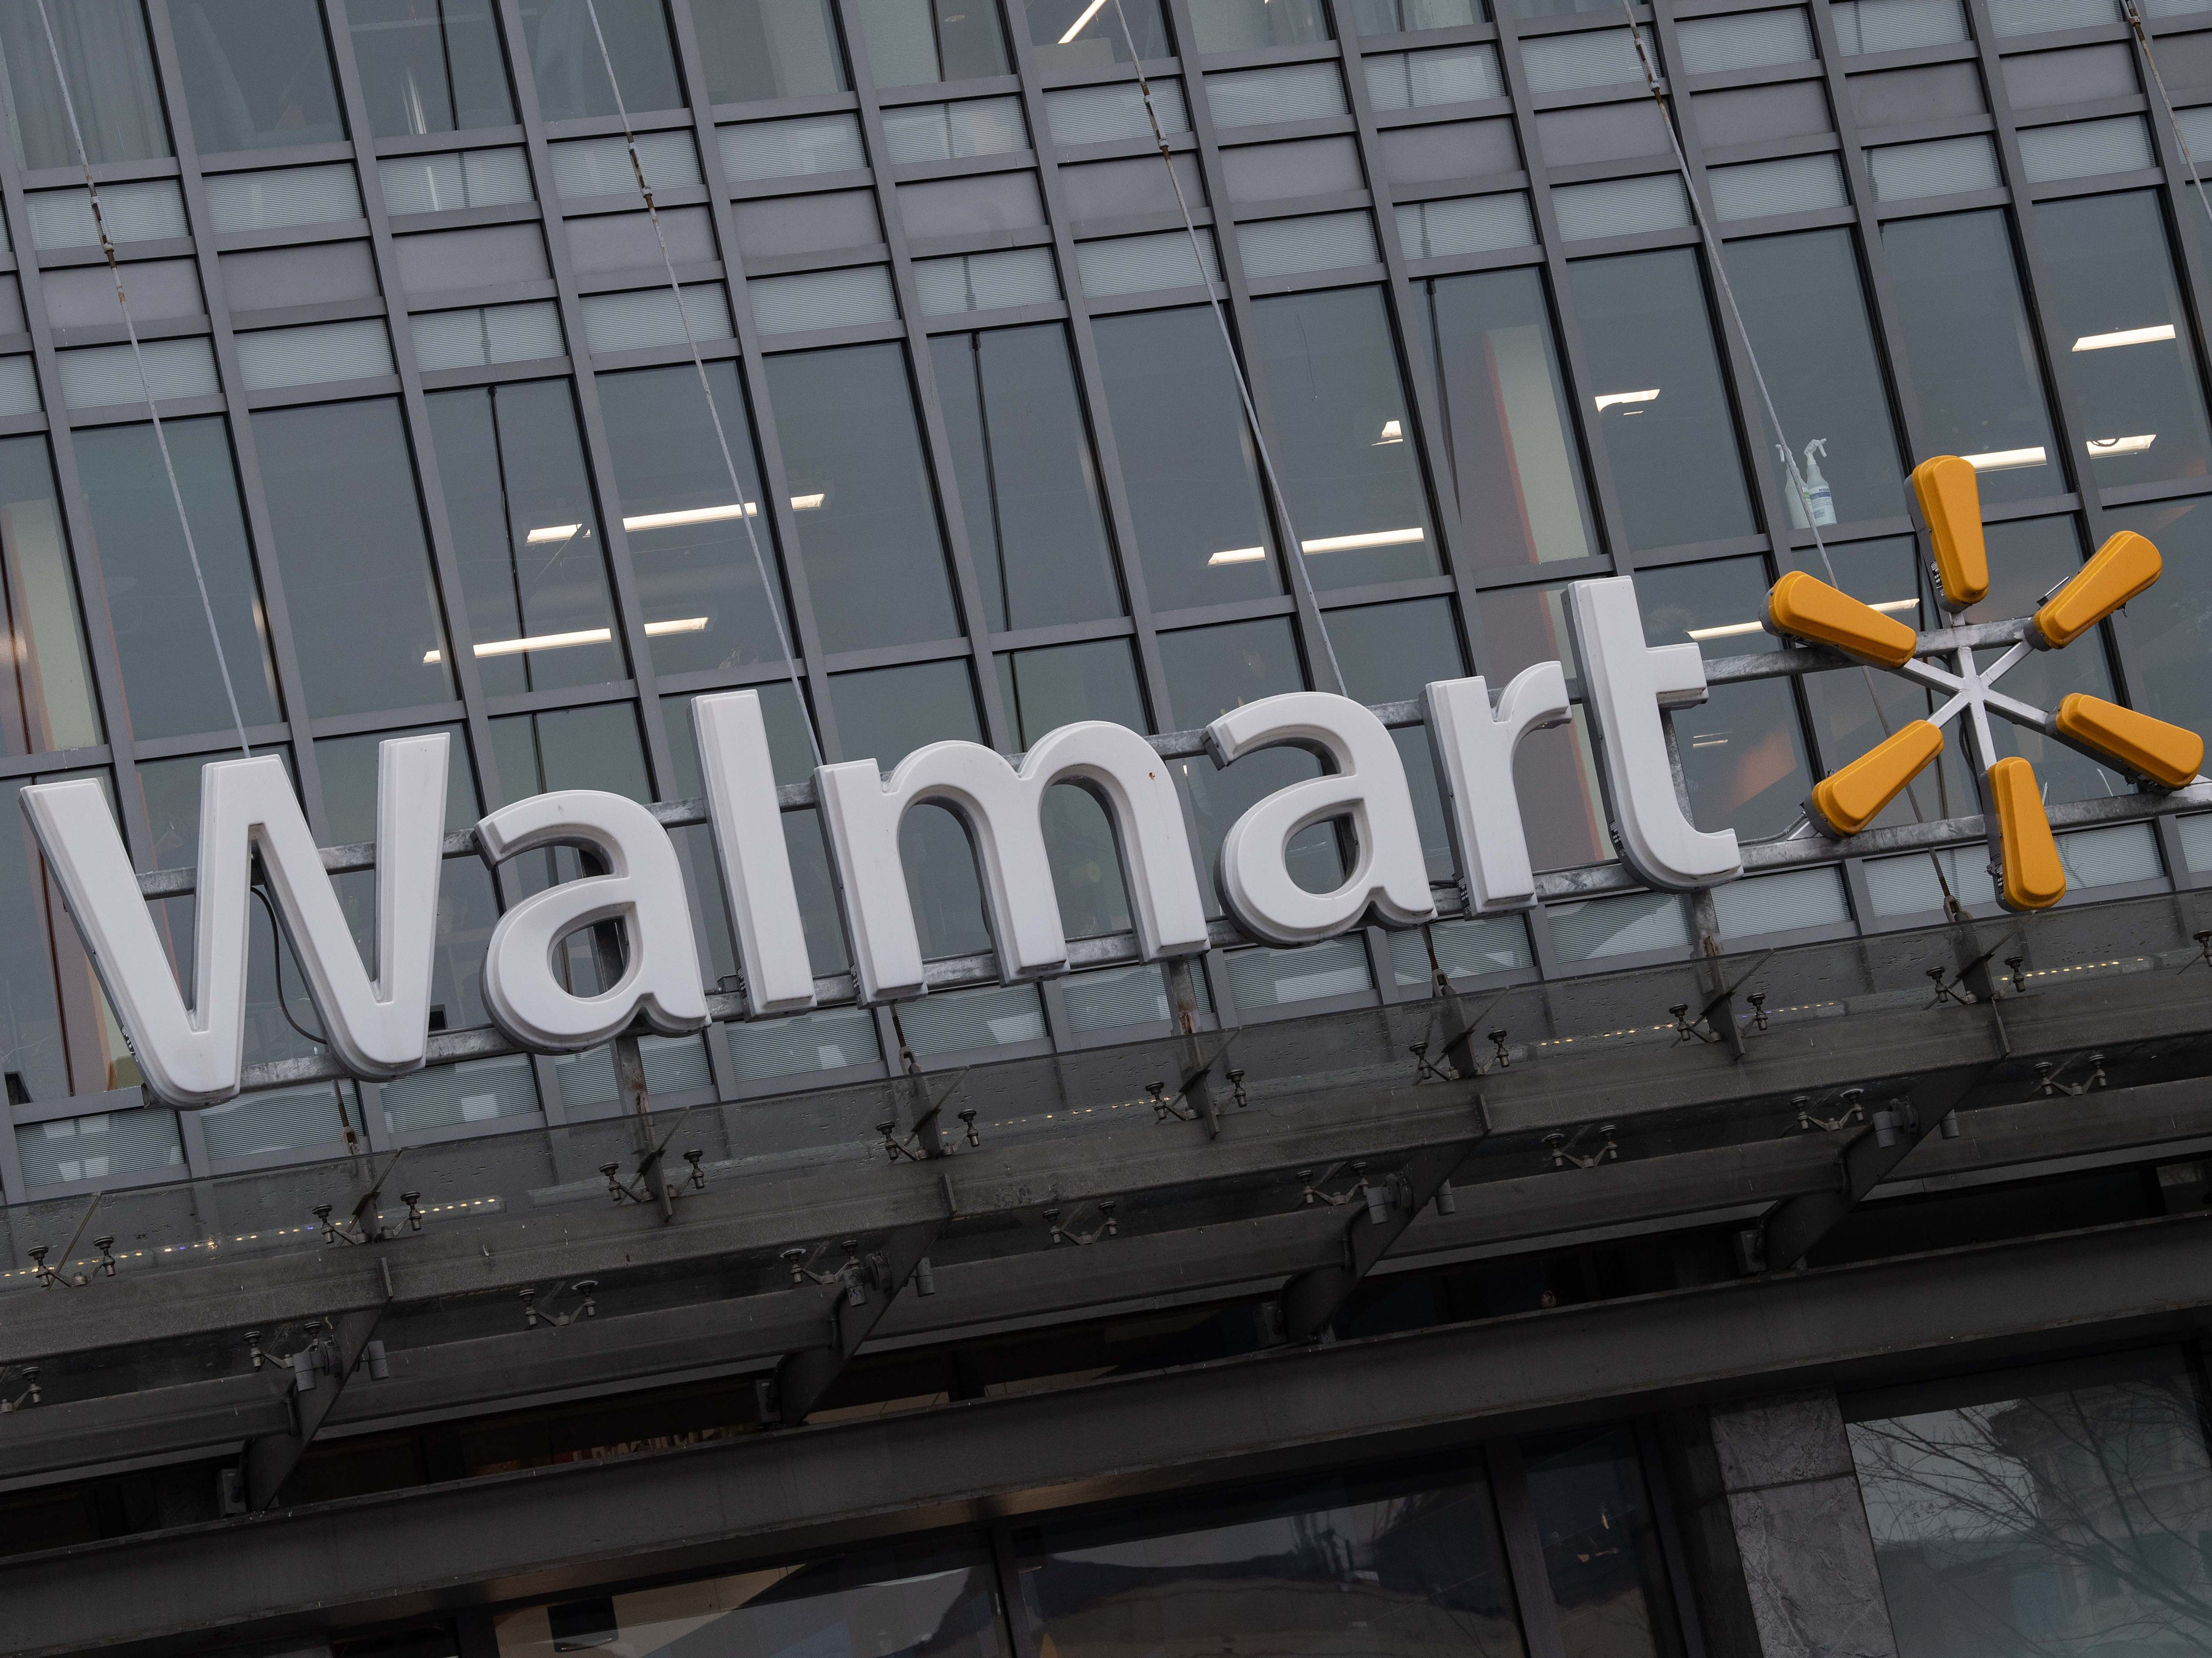 The Walmart logo is seen on a store in Washington, DC, on 1 March 2019